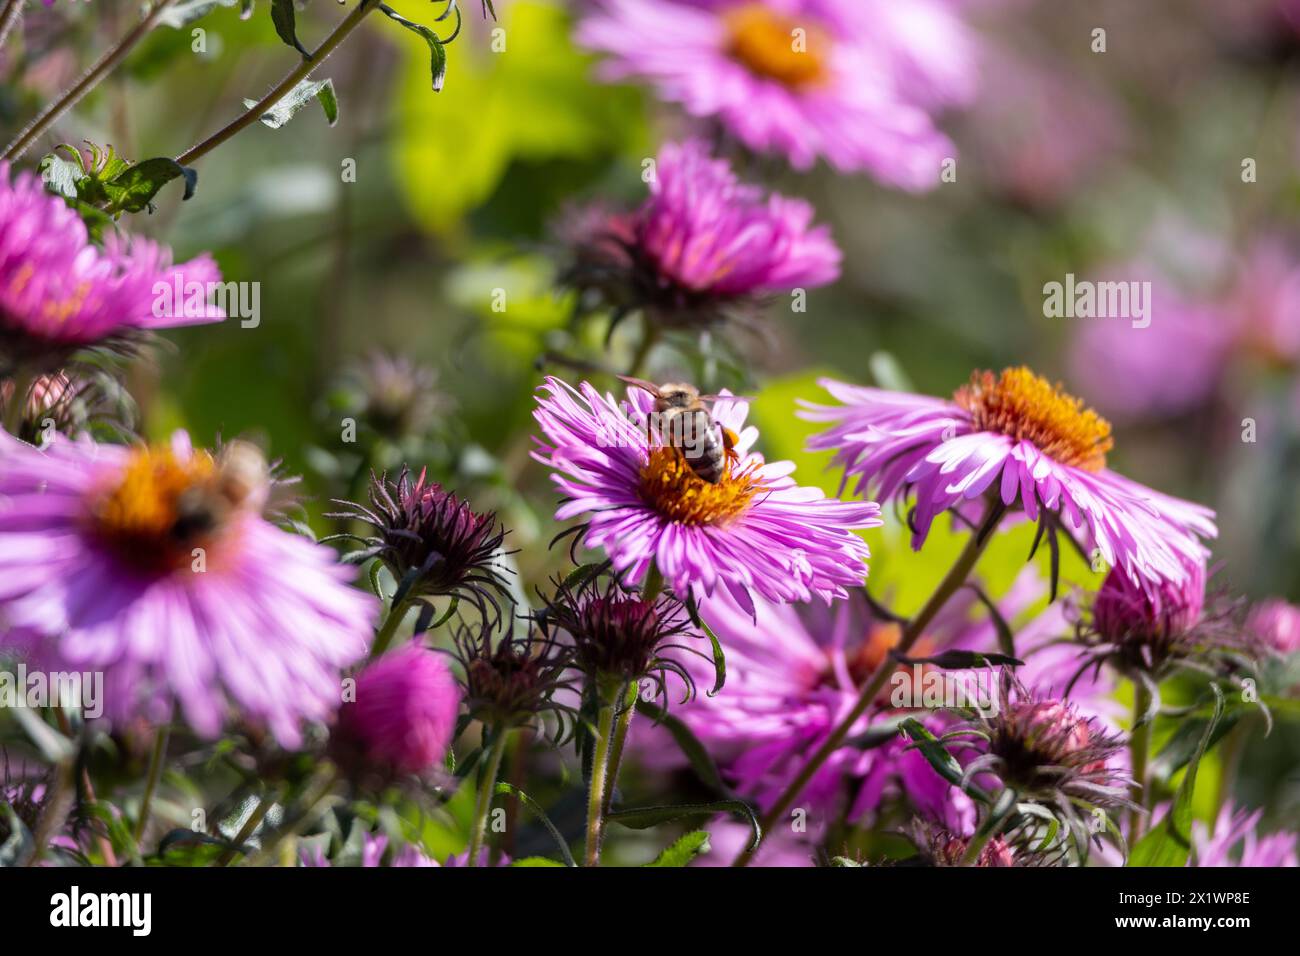 pink flowers of the aster close up. Aster Dumosus Stock Photo